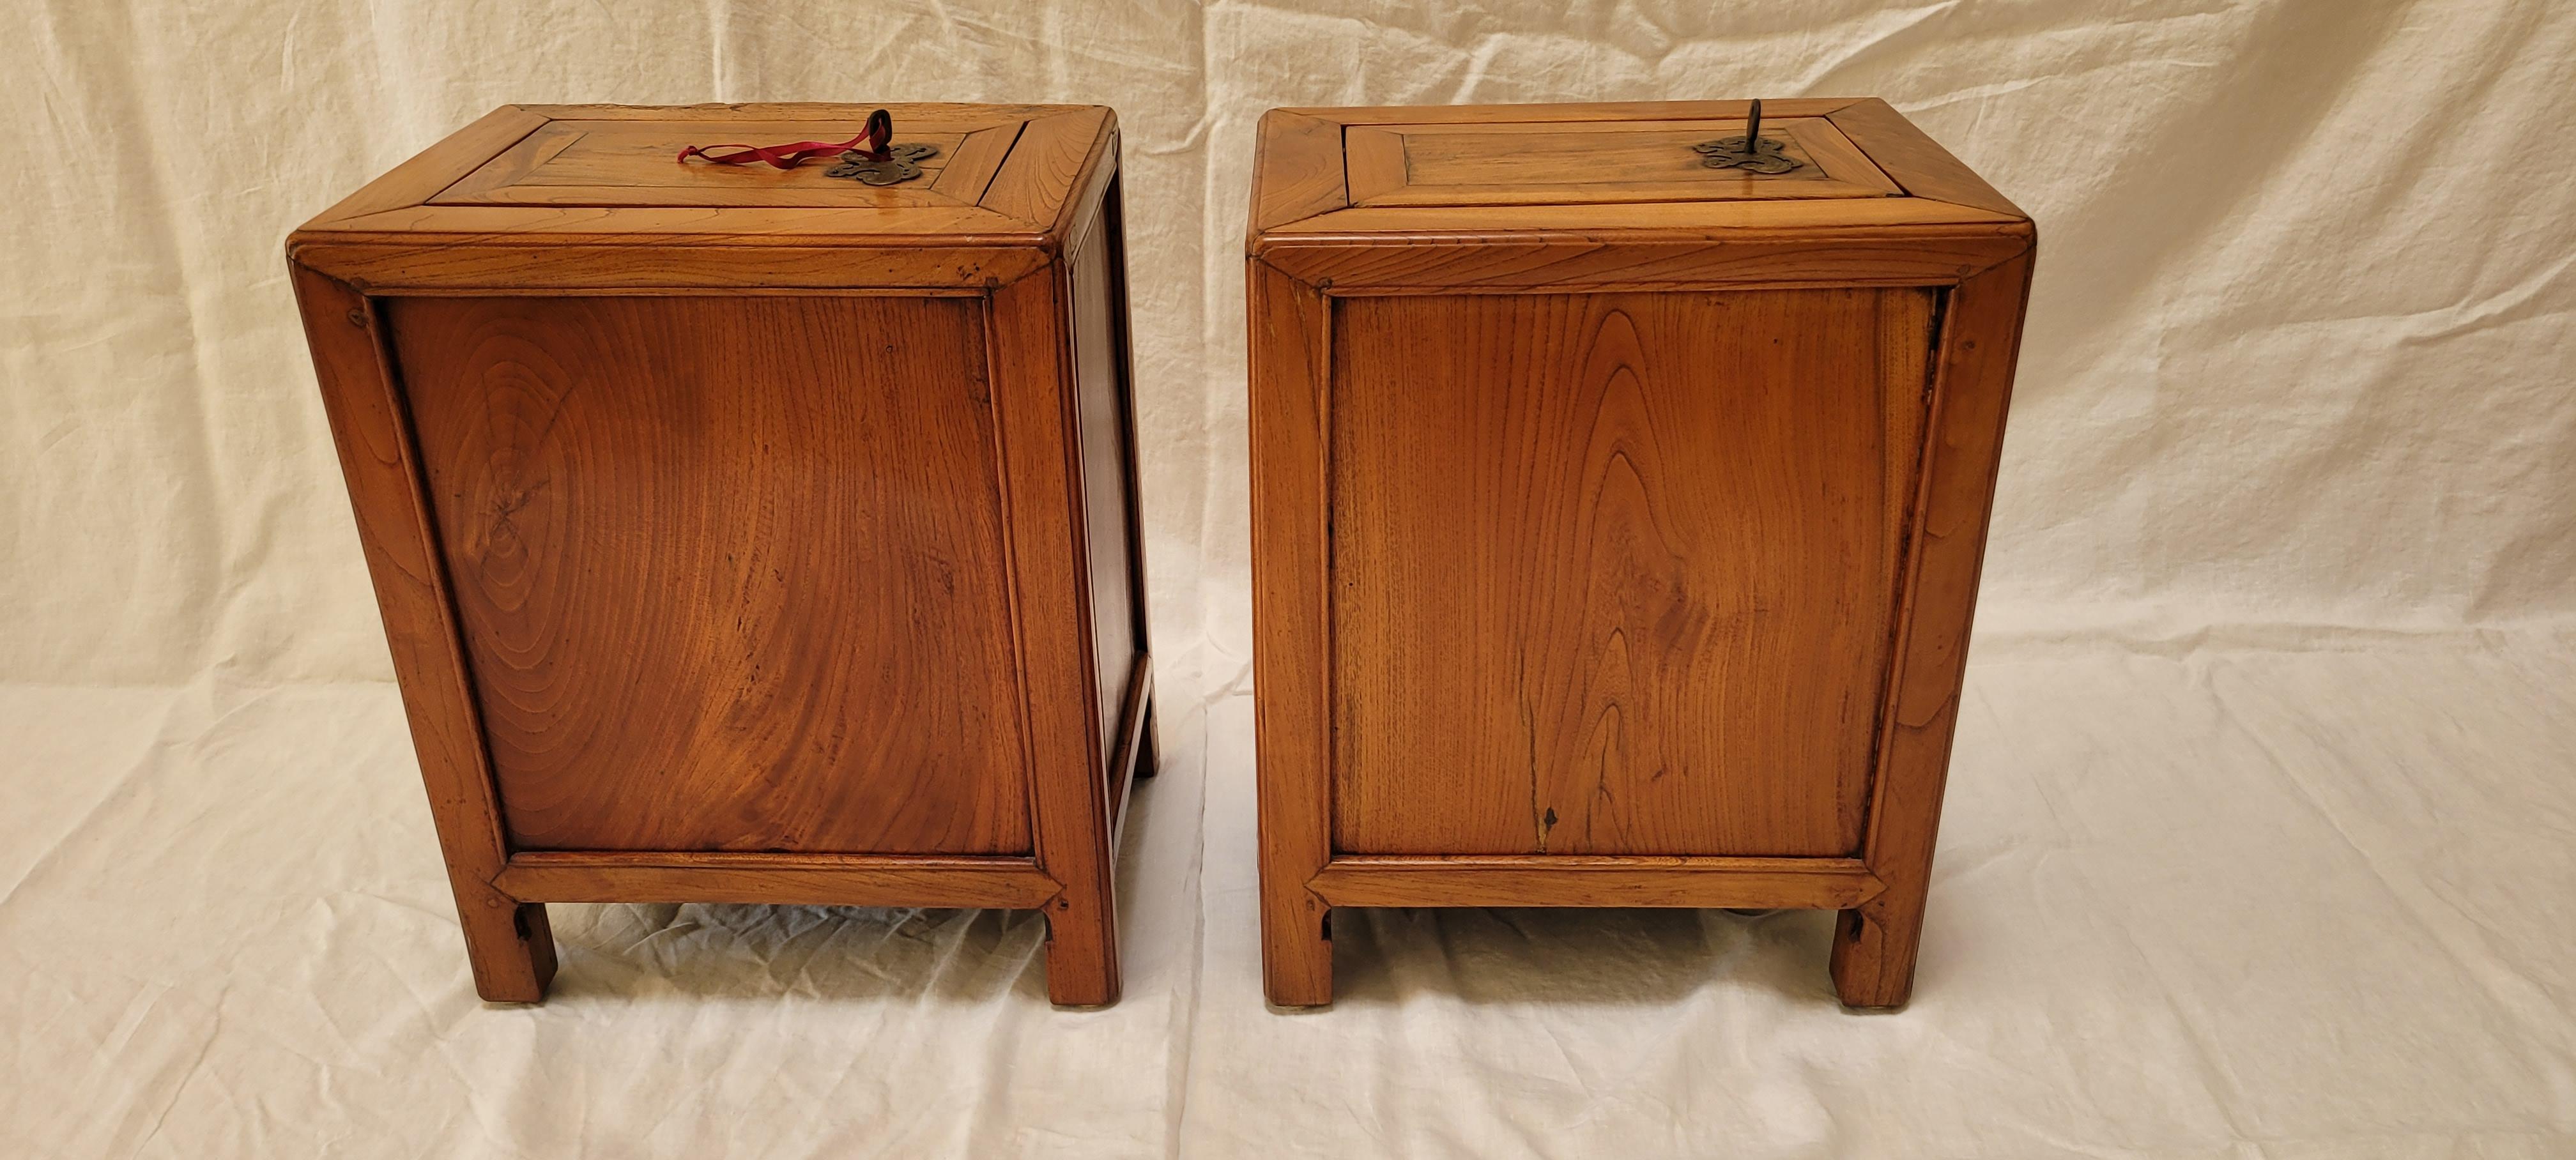 19th Century Pair of Money Chests For Sale 1